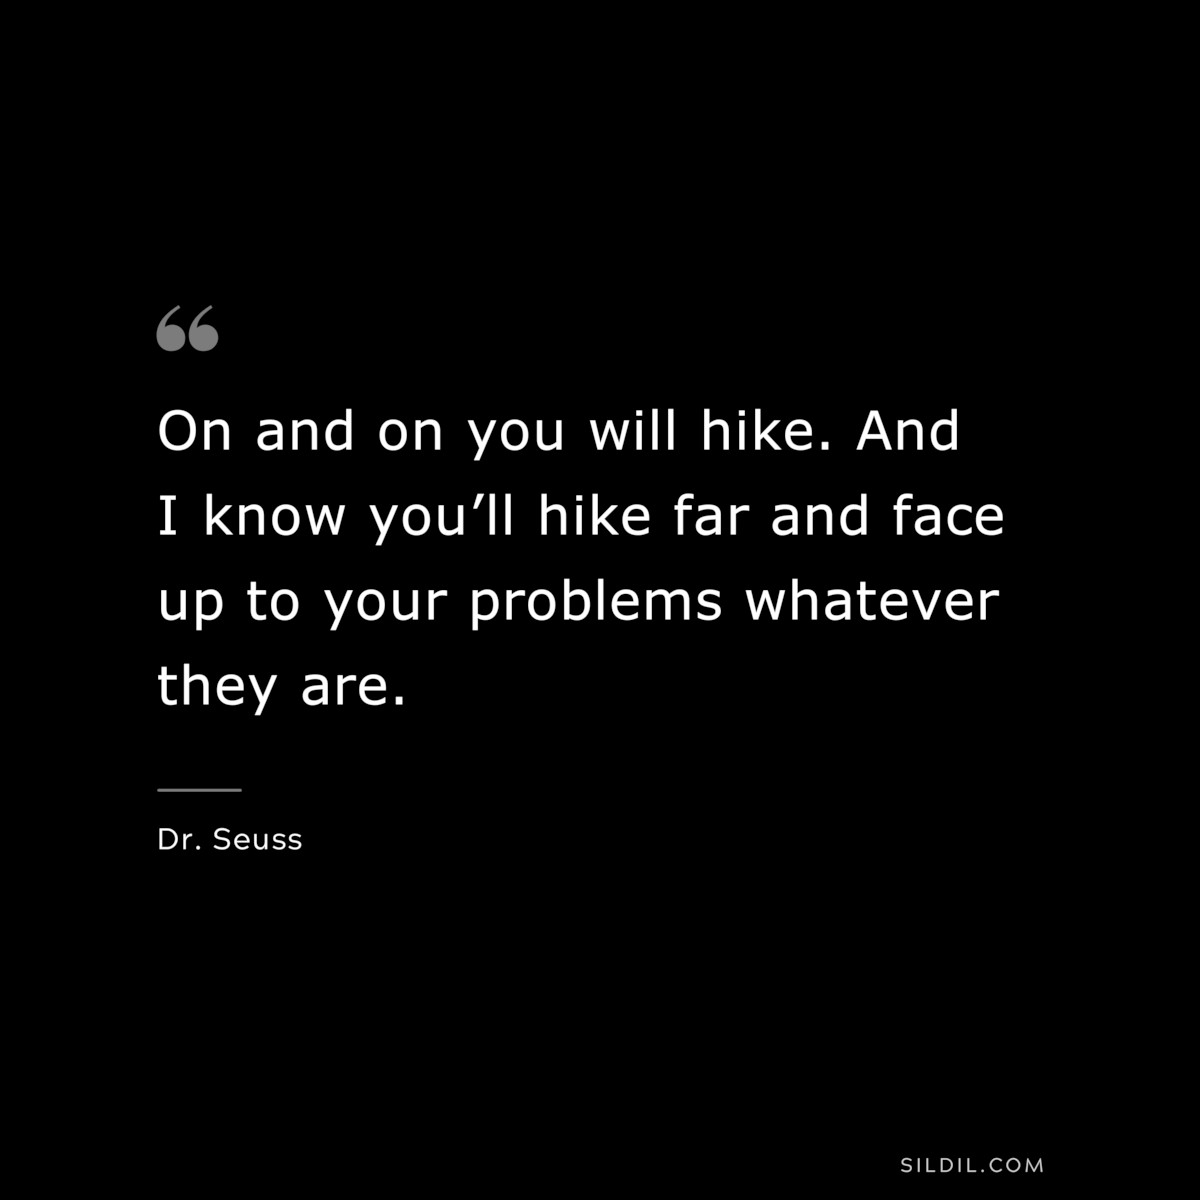 On and on you will hike. And I know you’ll hike far and face up to your problems whatever they are. ― Dr. Seuss